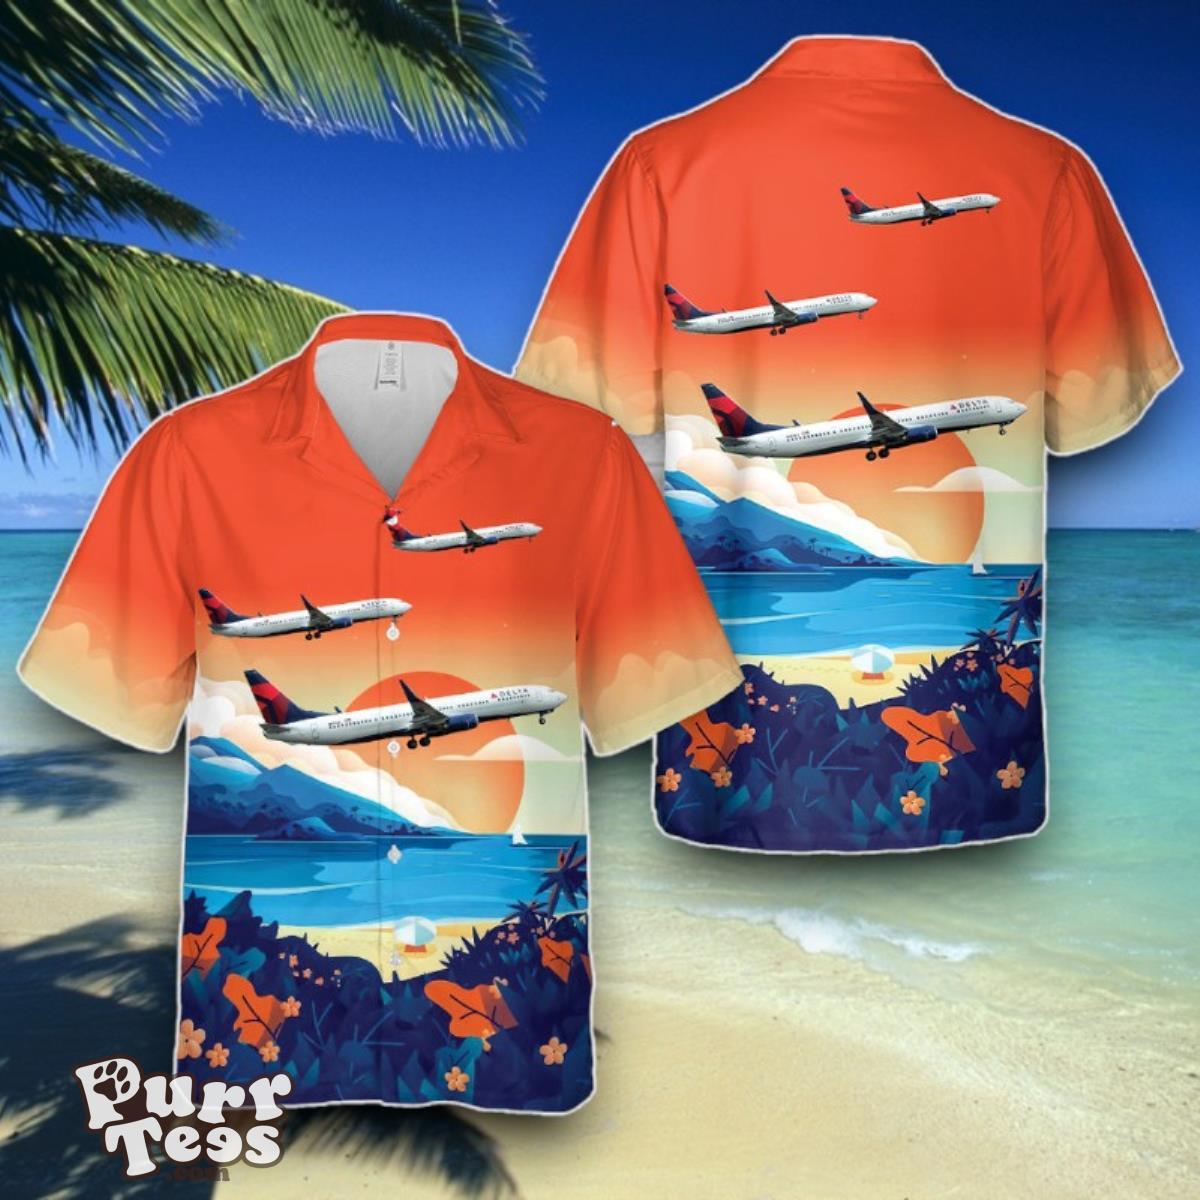 Delta Airline Next Generation Boeing Hawaiian Shirt Best Gift For Men And Women Product Photo 1